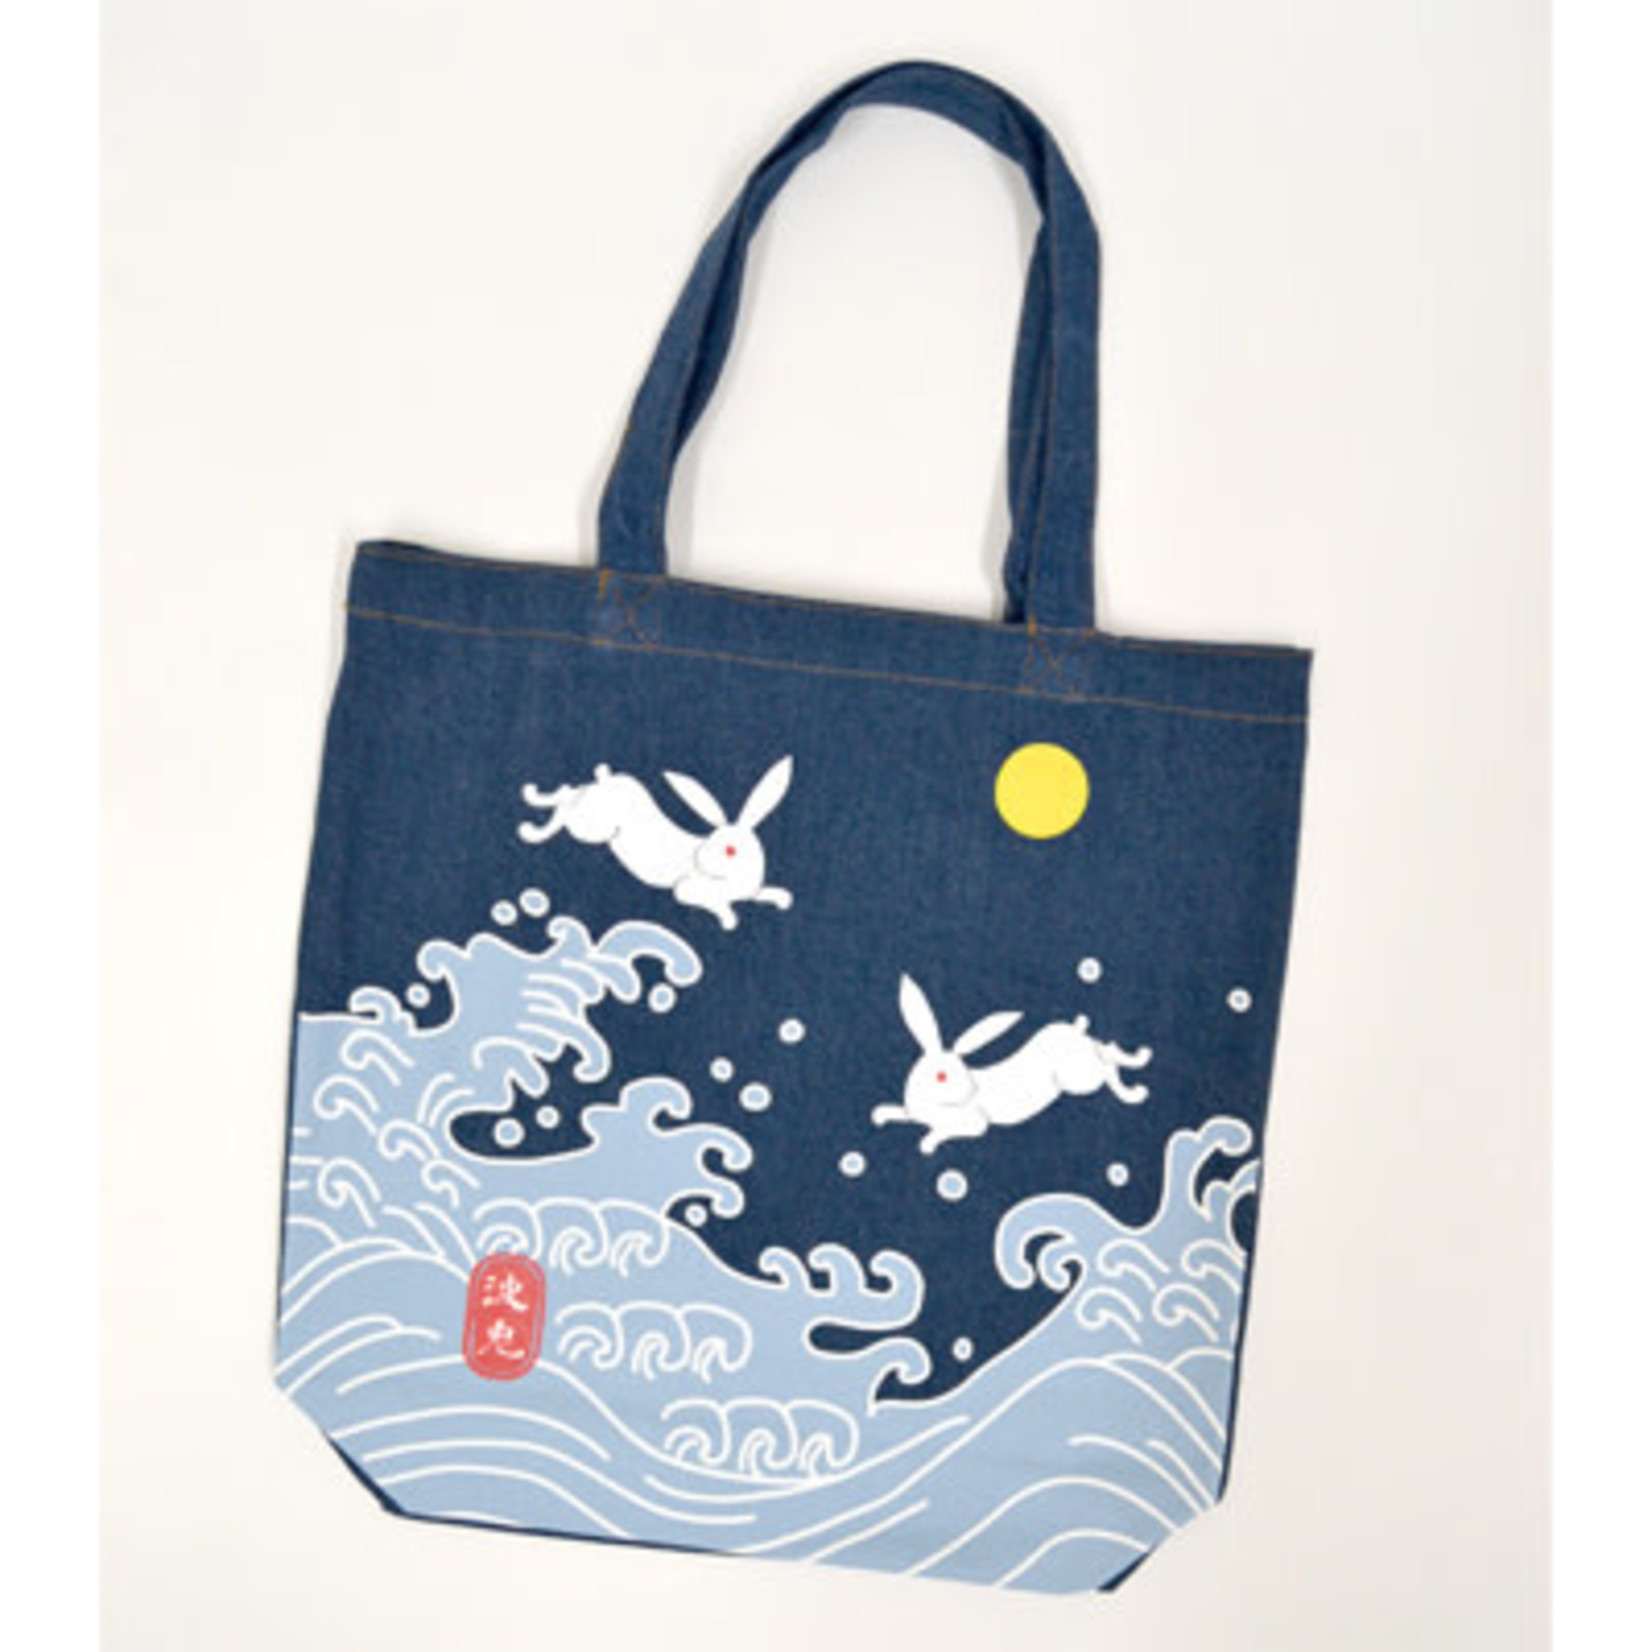 Shark girl anime face mask Tote Bag for Sale by Japanculture